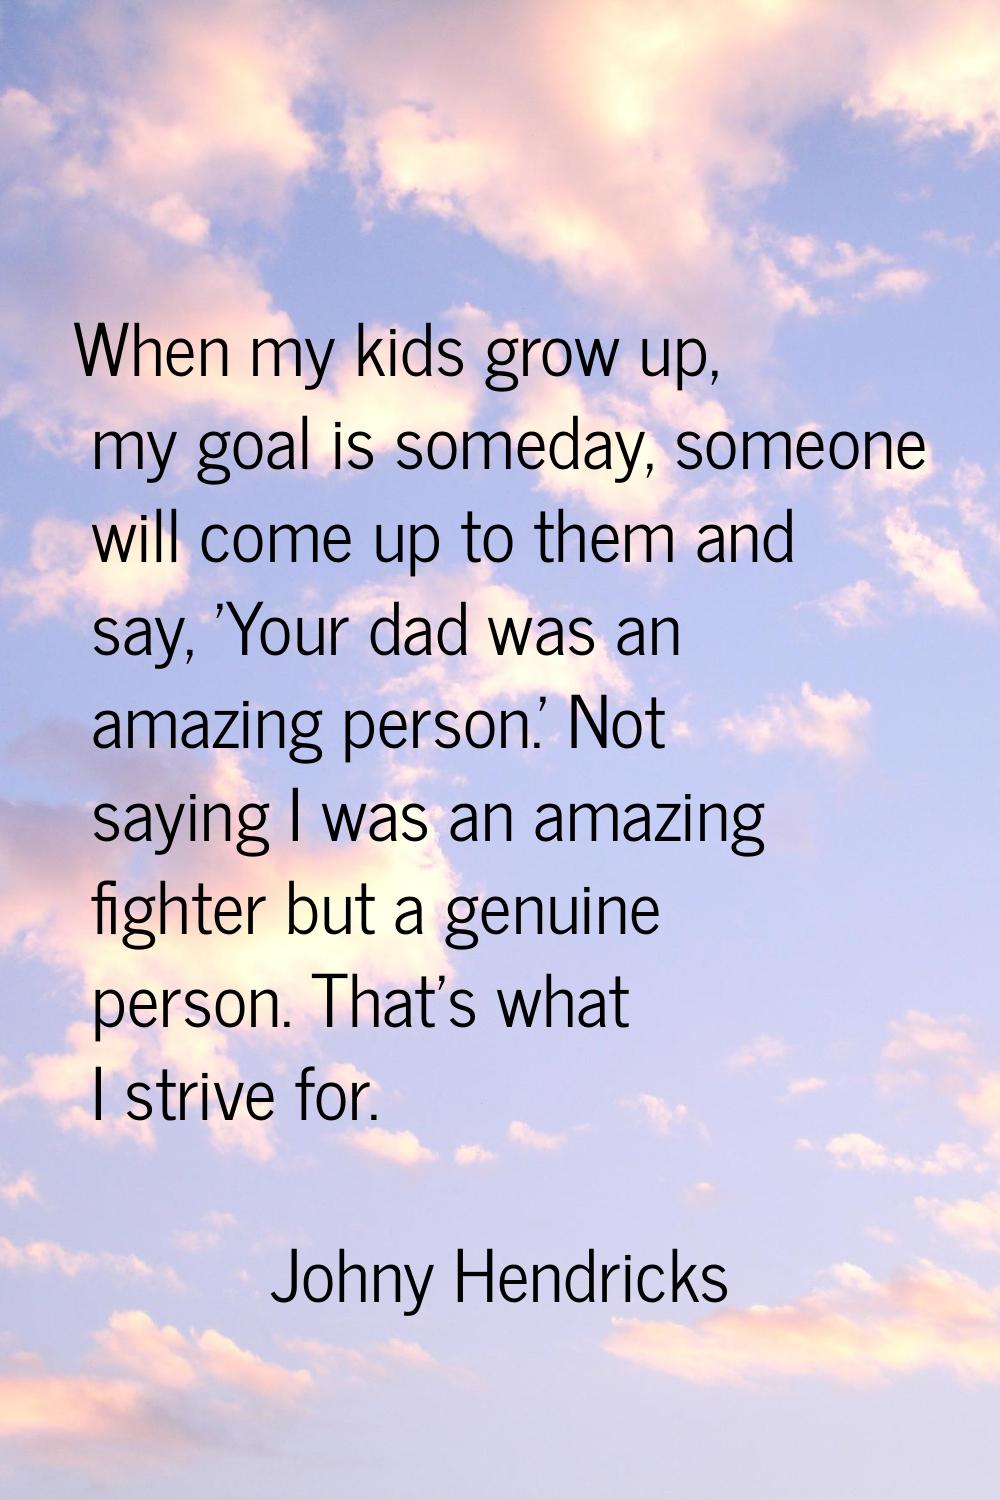 When my kids grow up, my goal is someday, someone will come up to them and say, 'Your dad was an am